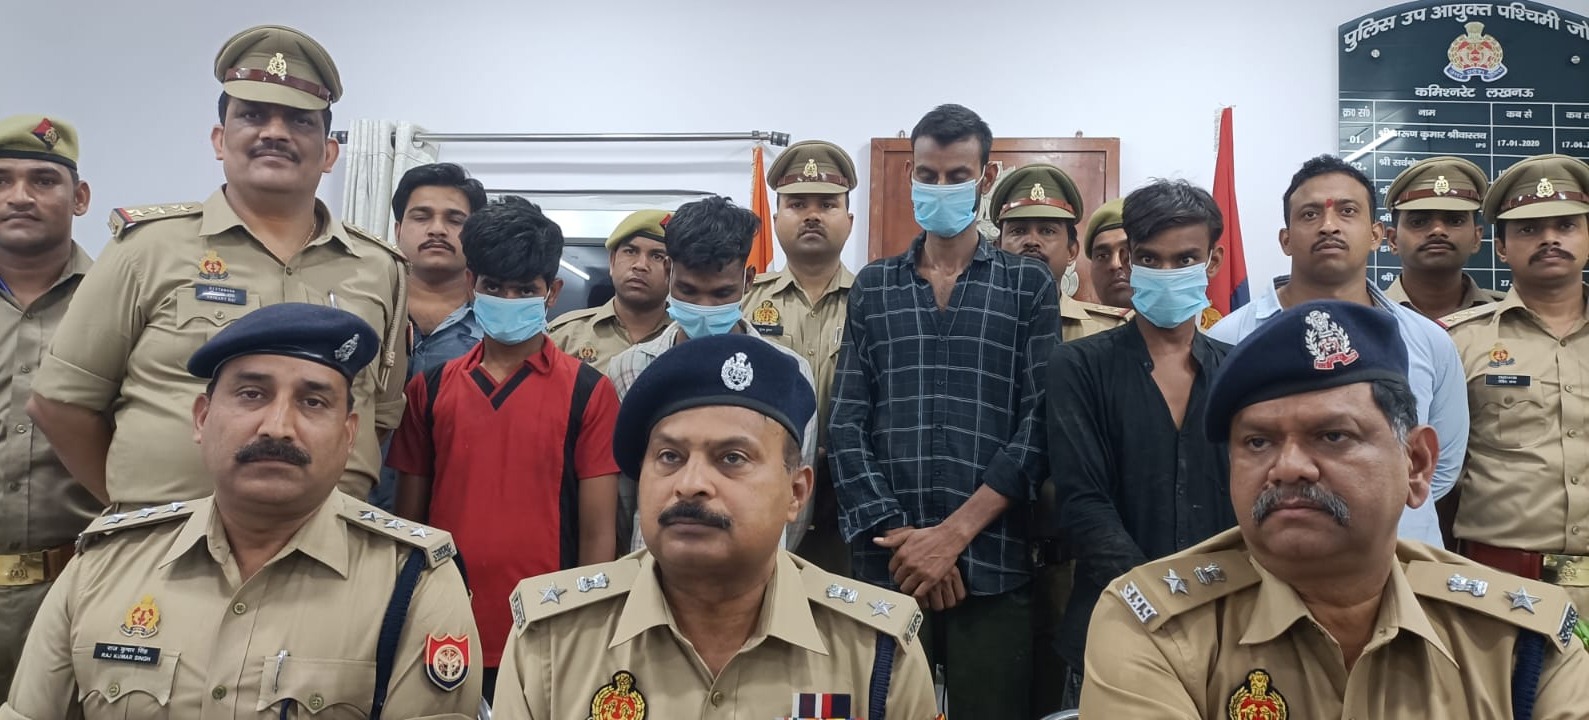 Thakurganj police station team uncovered the burglary incident and arrested 04 vicious thieves/accused